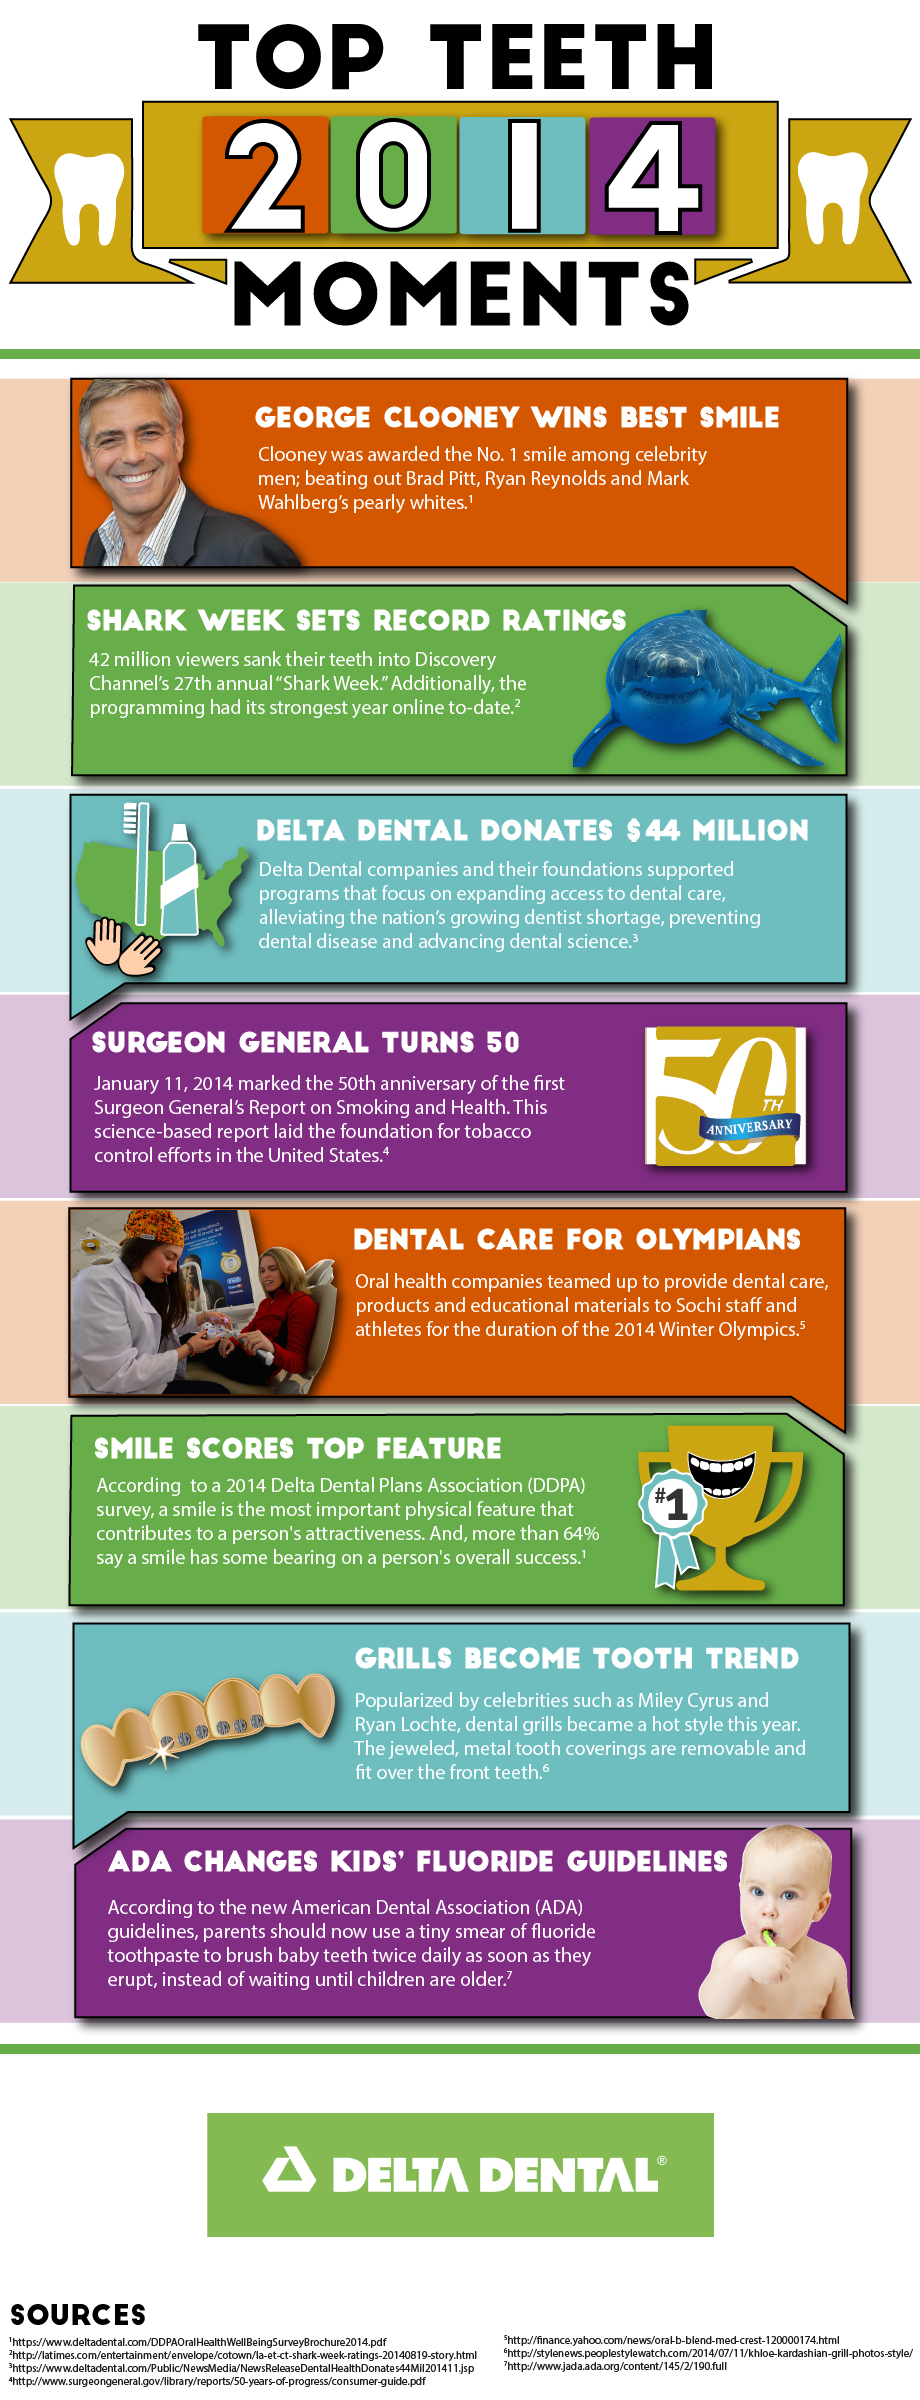 Top Teeth Moments Infographic